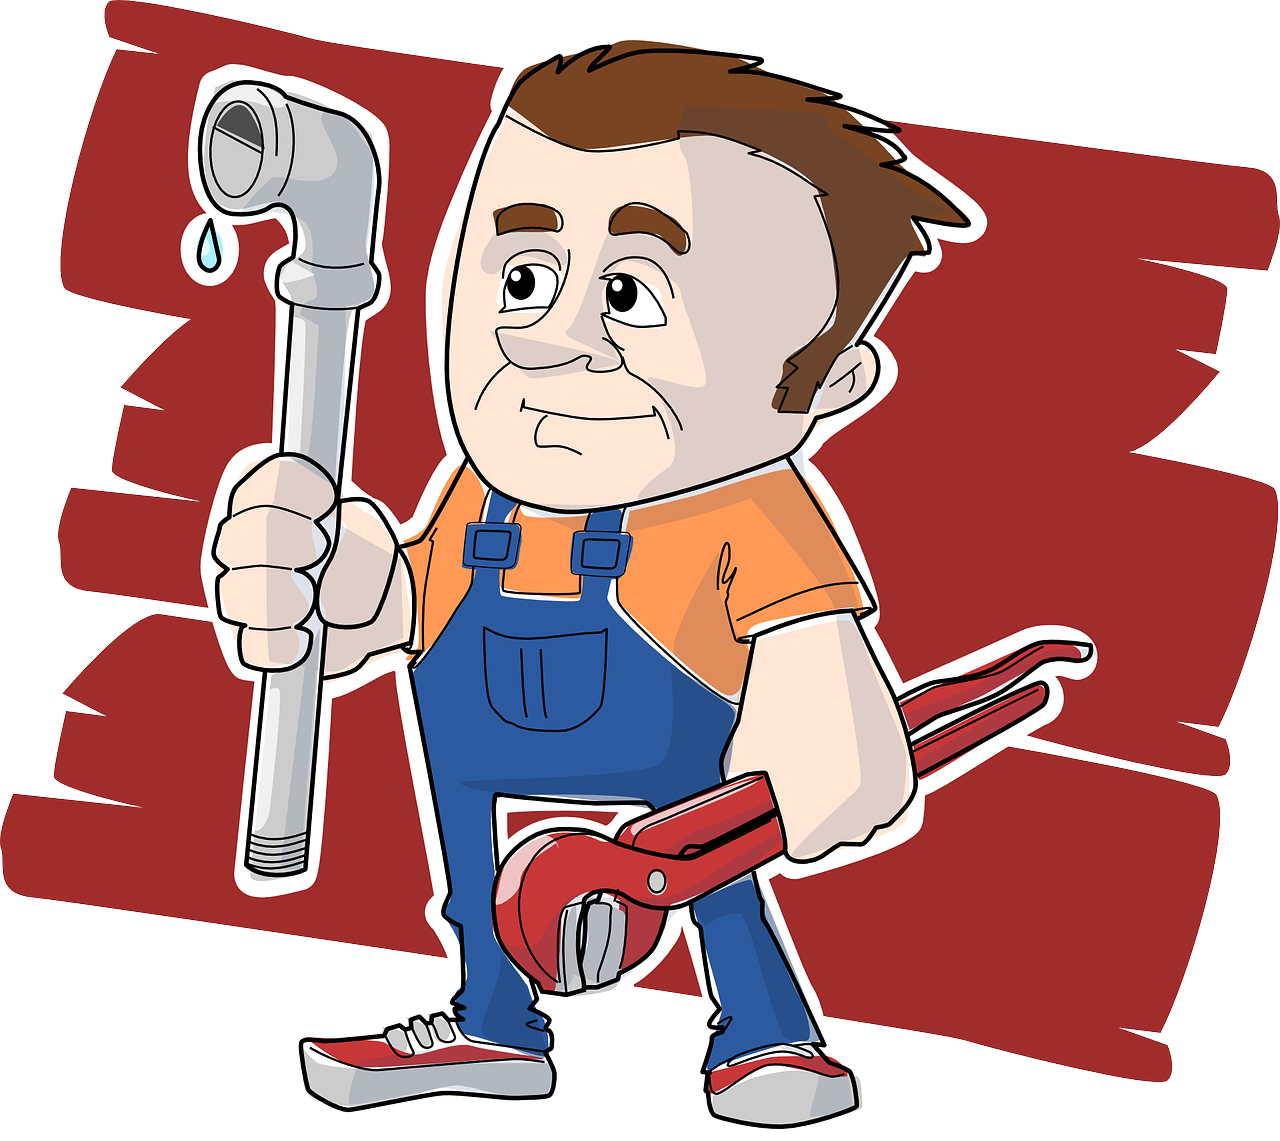 a man in overalls holding a wrenet, a digital rendering, by Harry Beckhoff, pixabay, plasticien, drainpipes, comic character design, wrench, clean vector art